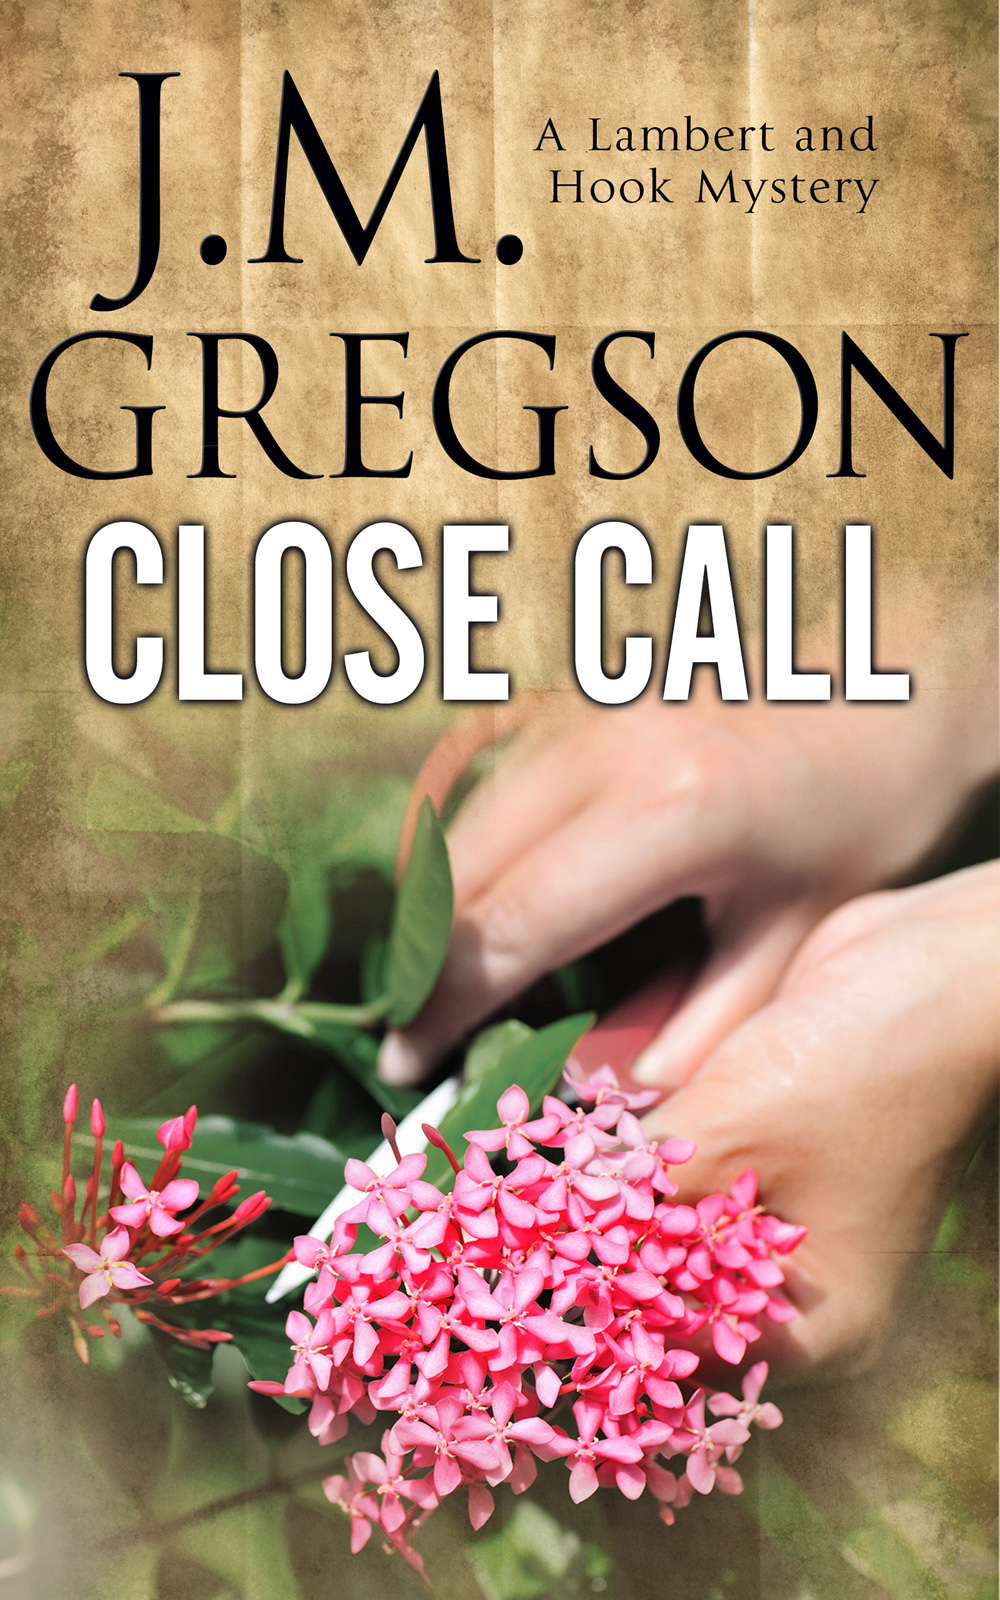 Close Call (2015) by J.M. Gregson